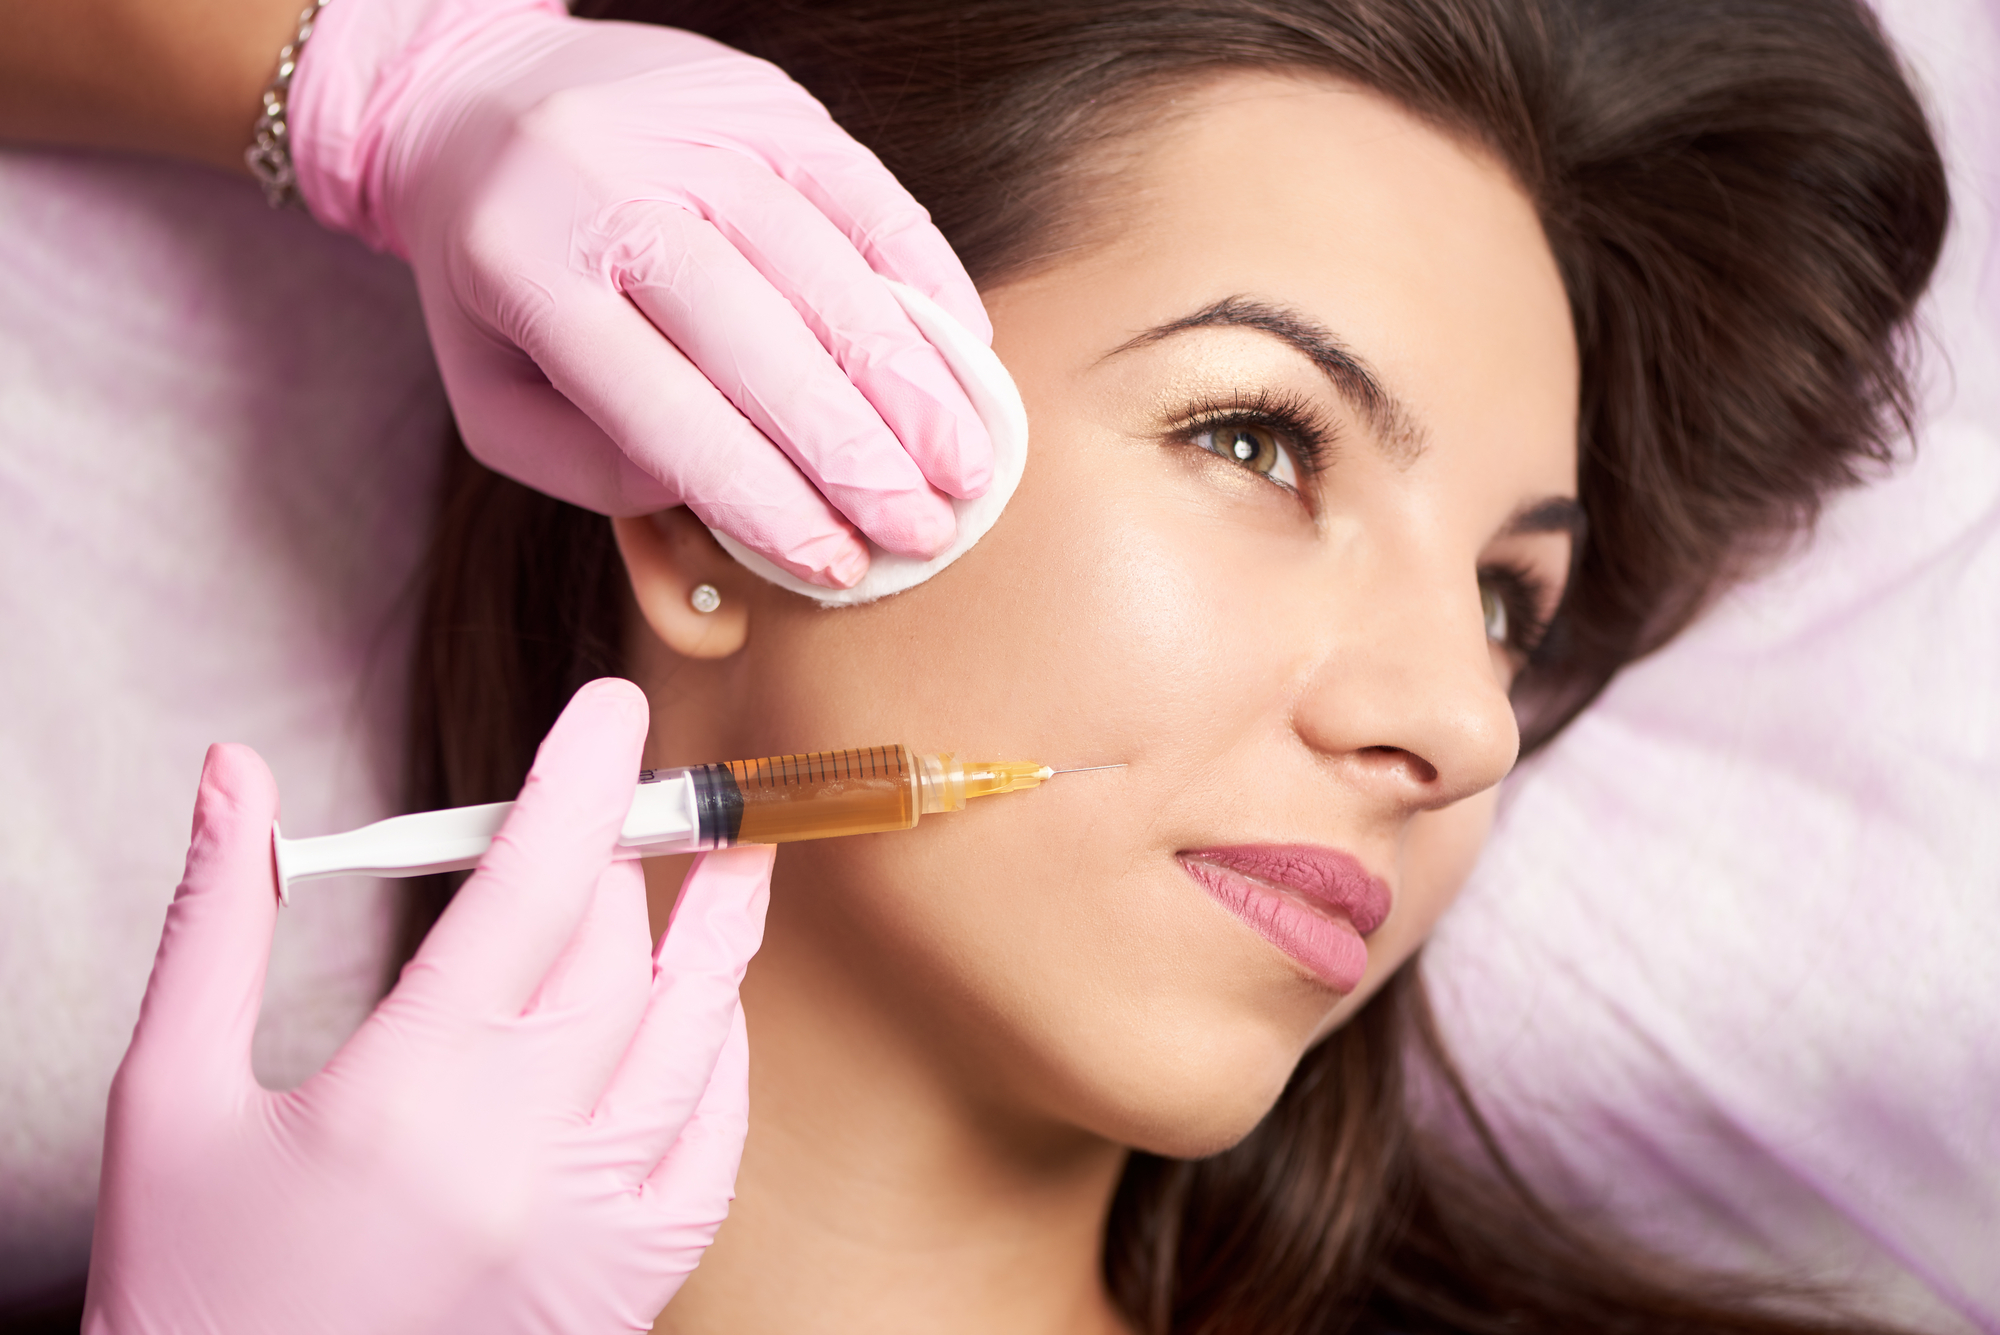 Dermal fillers, such as cheek fillers, inject a substance into the skin to plump it up and reduce the appearance of wrinkles.